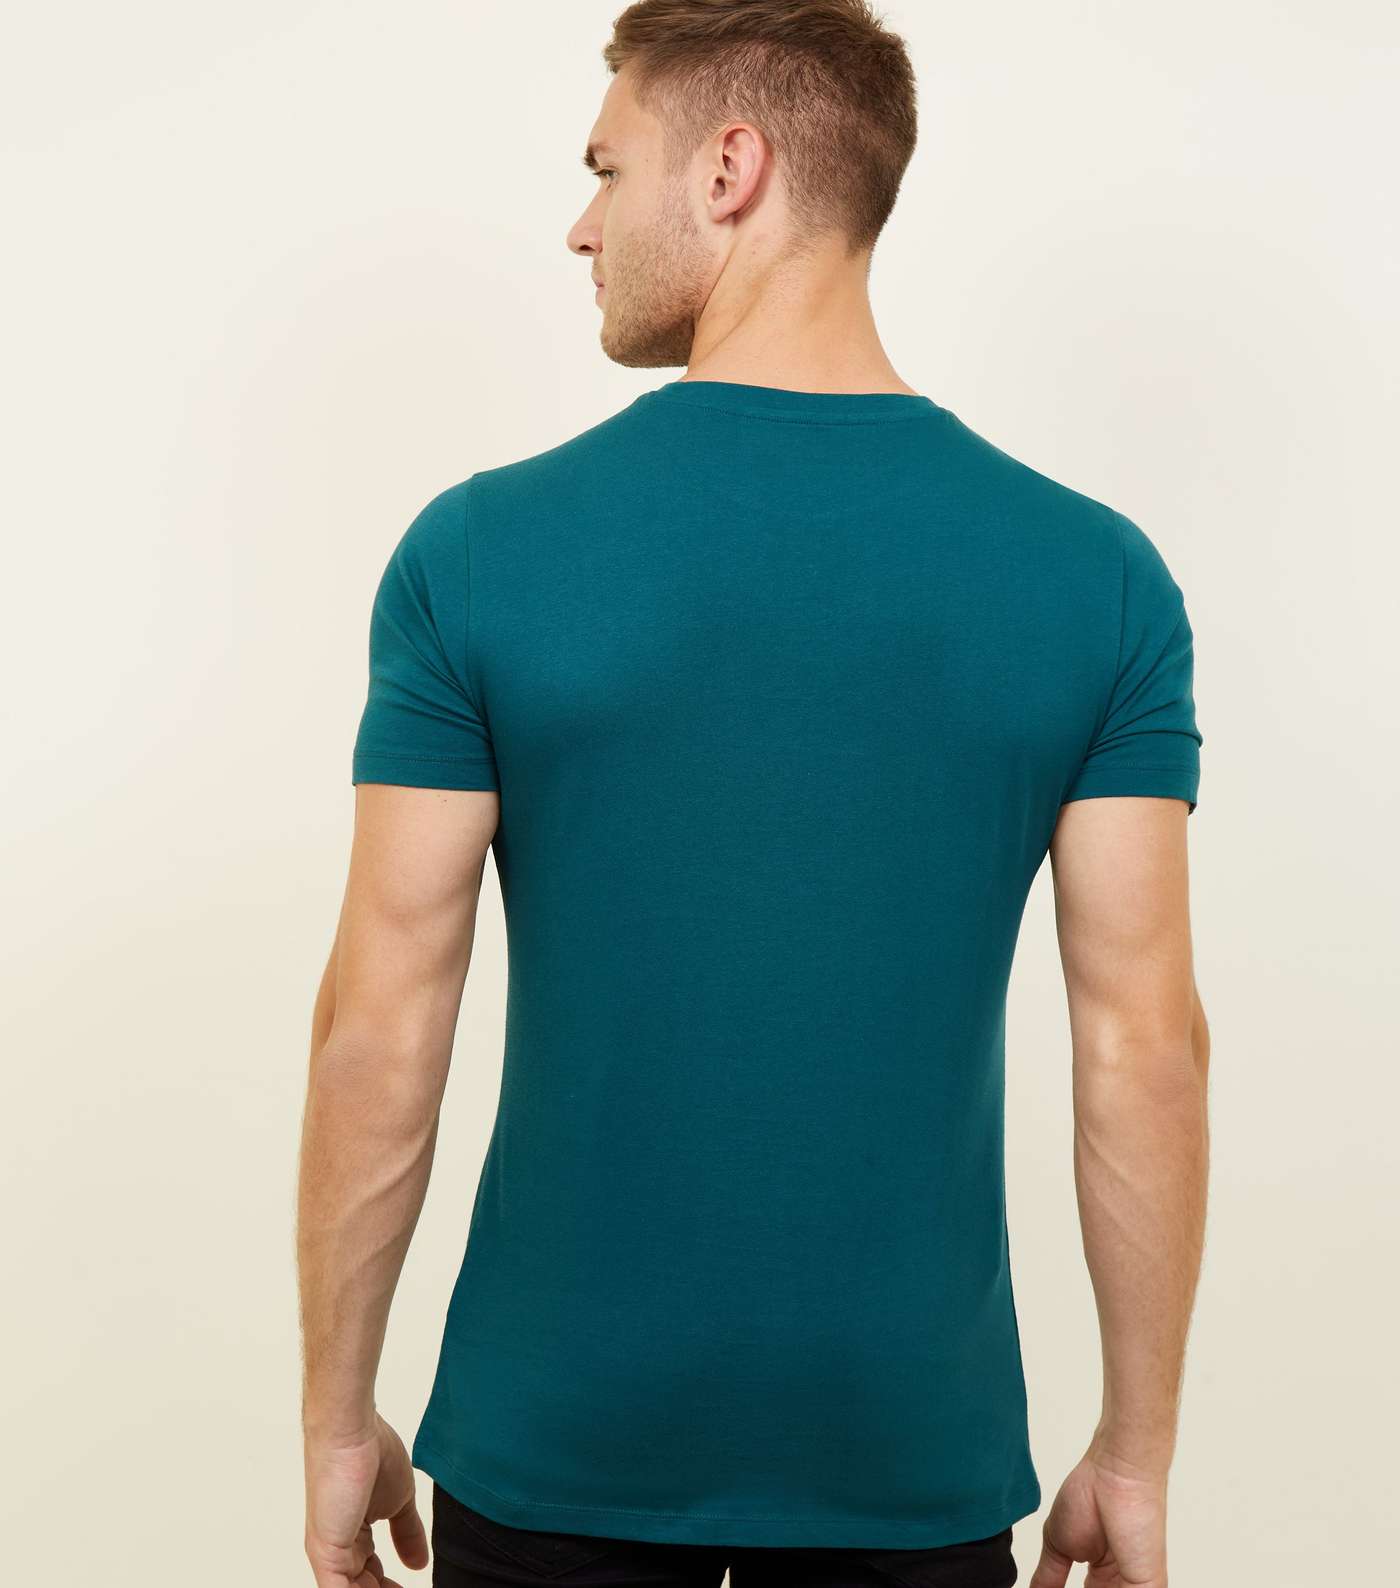 Teal Short Sleeve Muscle Fit T-Shirt Image 3